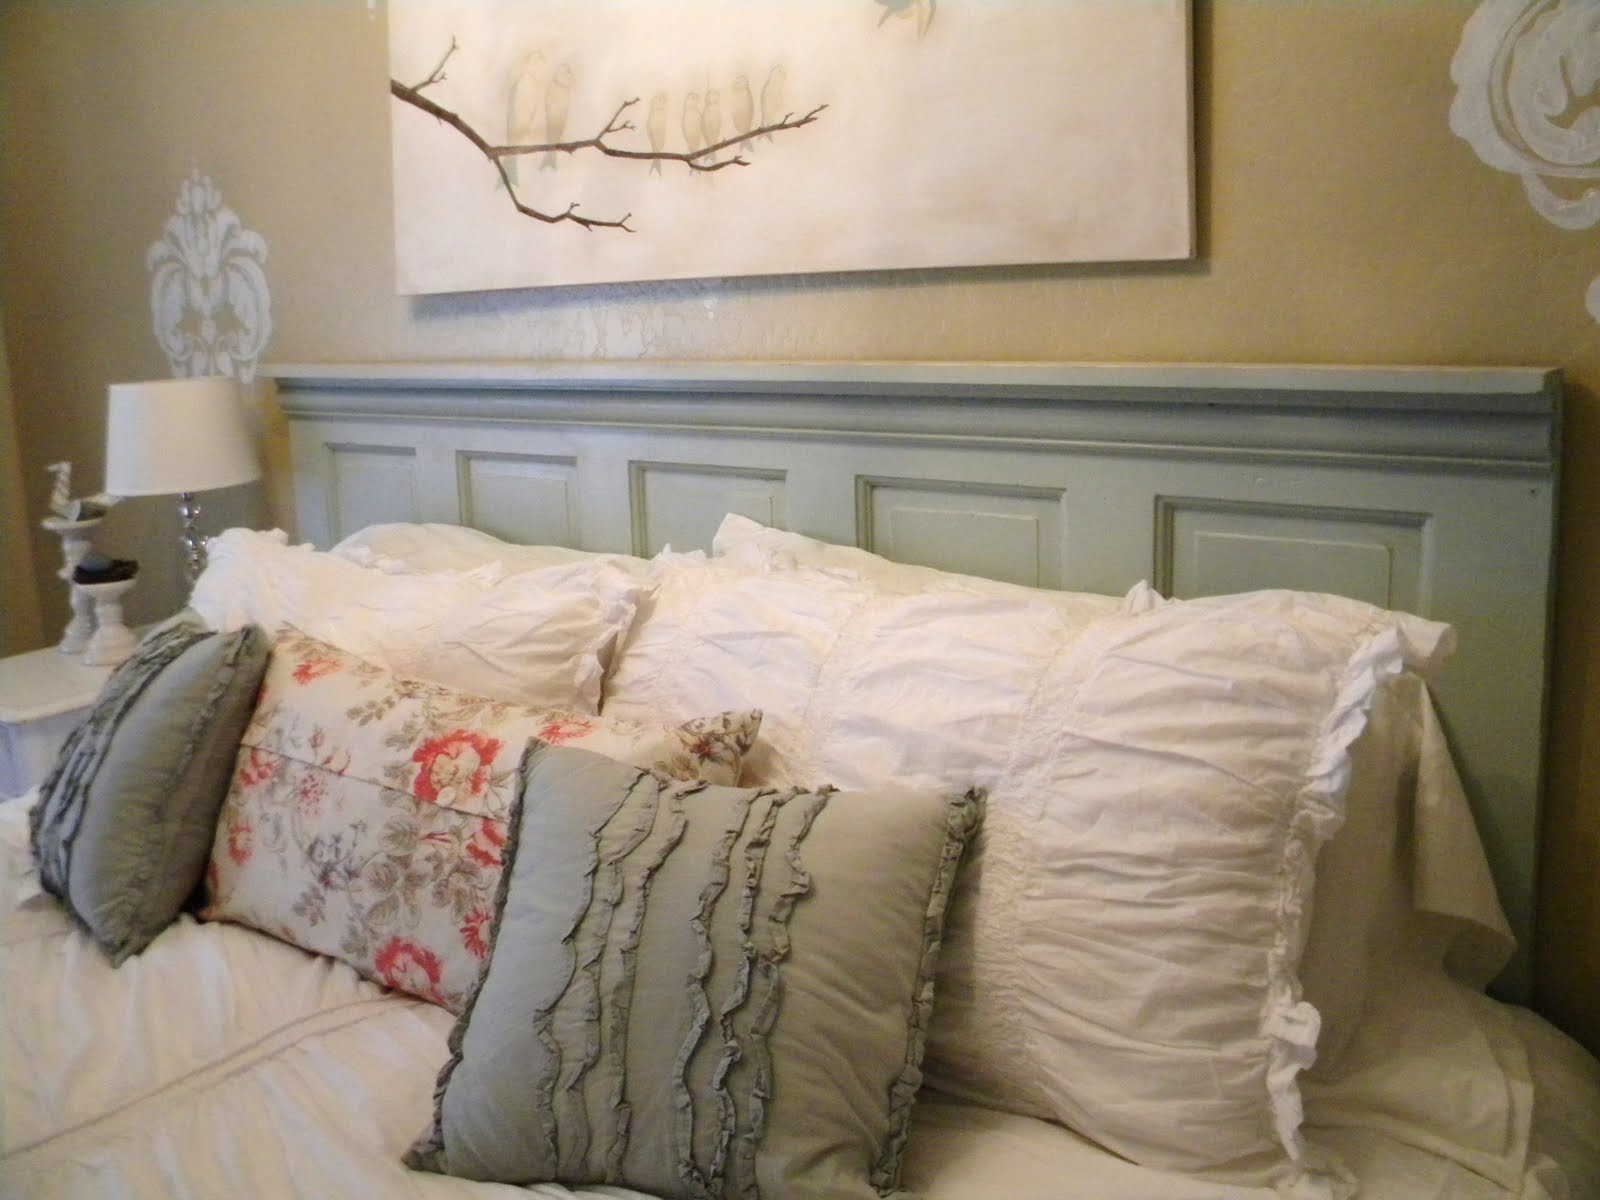 10 Lovable Make Your Own Headboard Ideas diy bed headboard make your own before you try to read these tips 2022